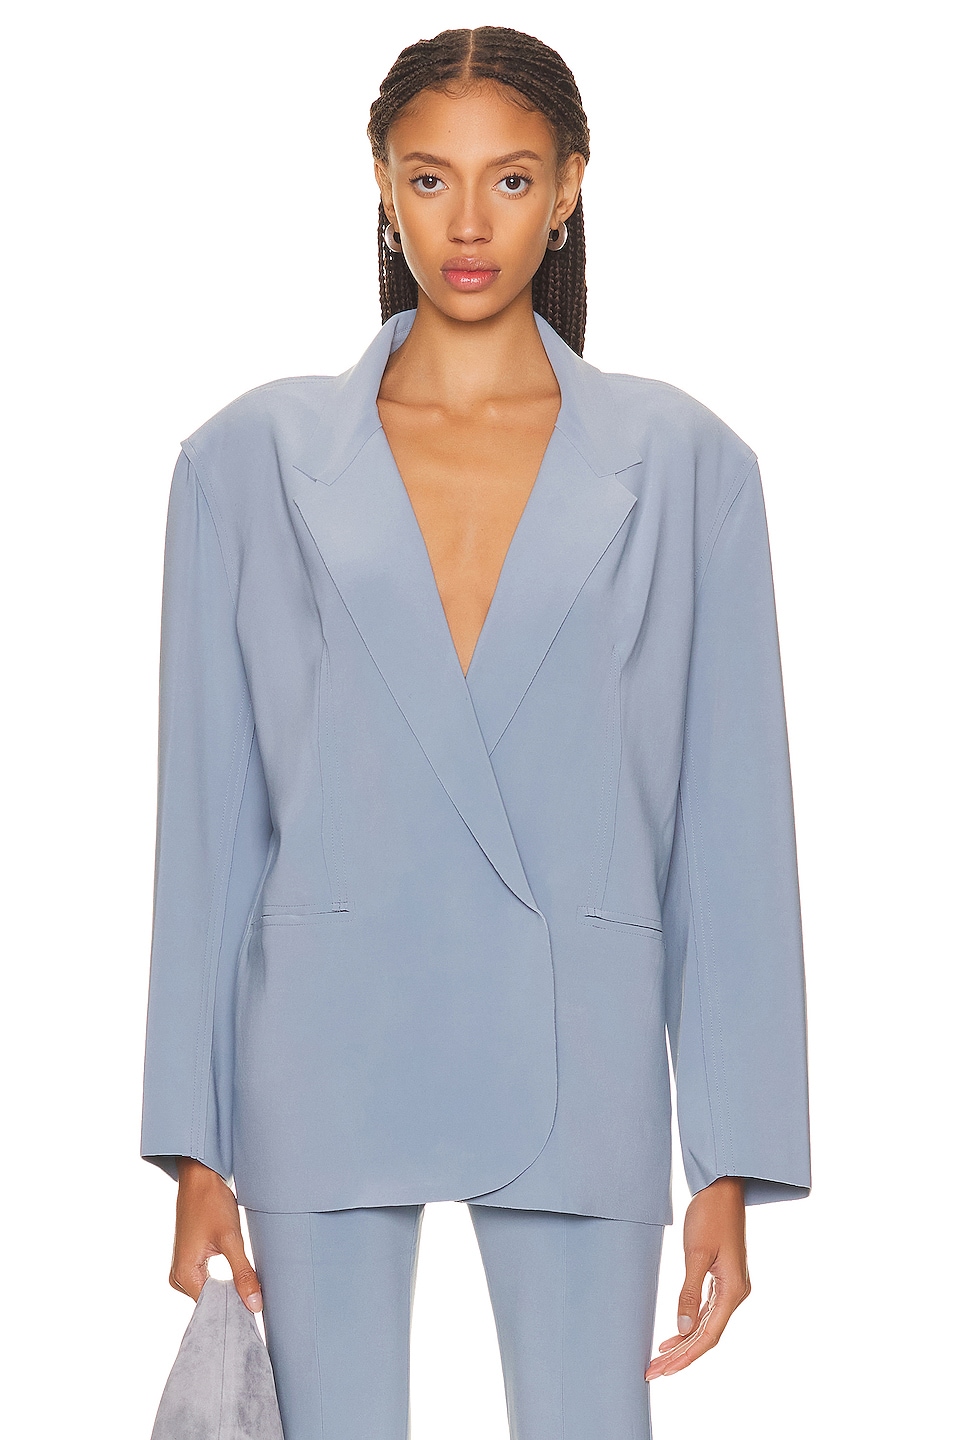 Norma Kamali for FWRD Oversized Double Breasted Jacket in Soft Blue | FWRD